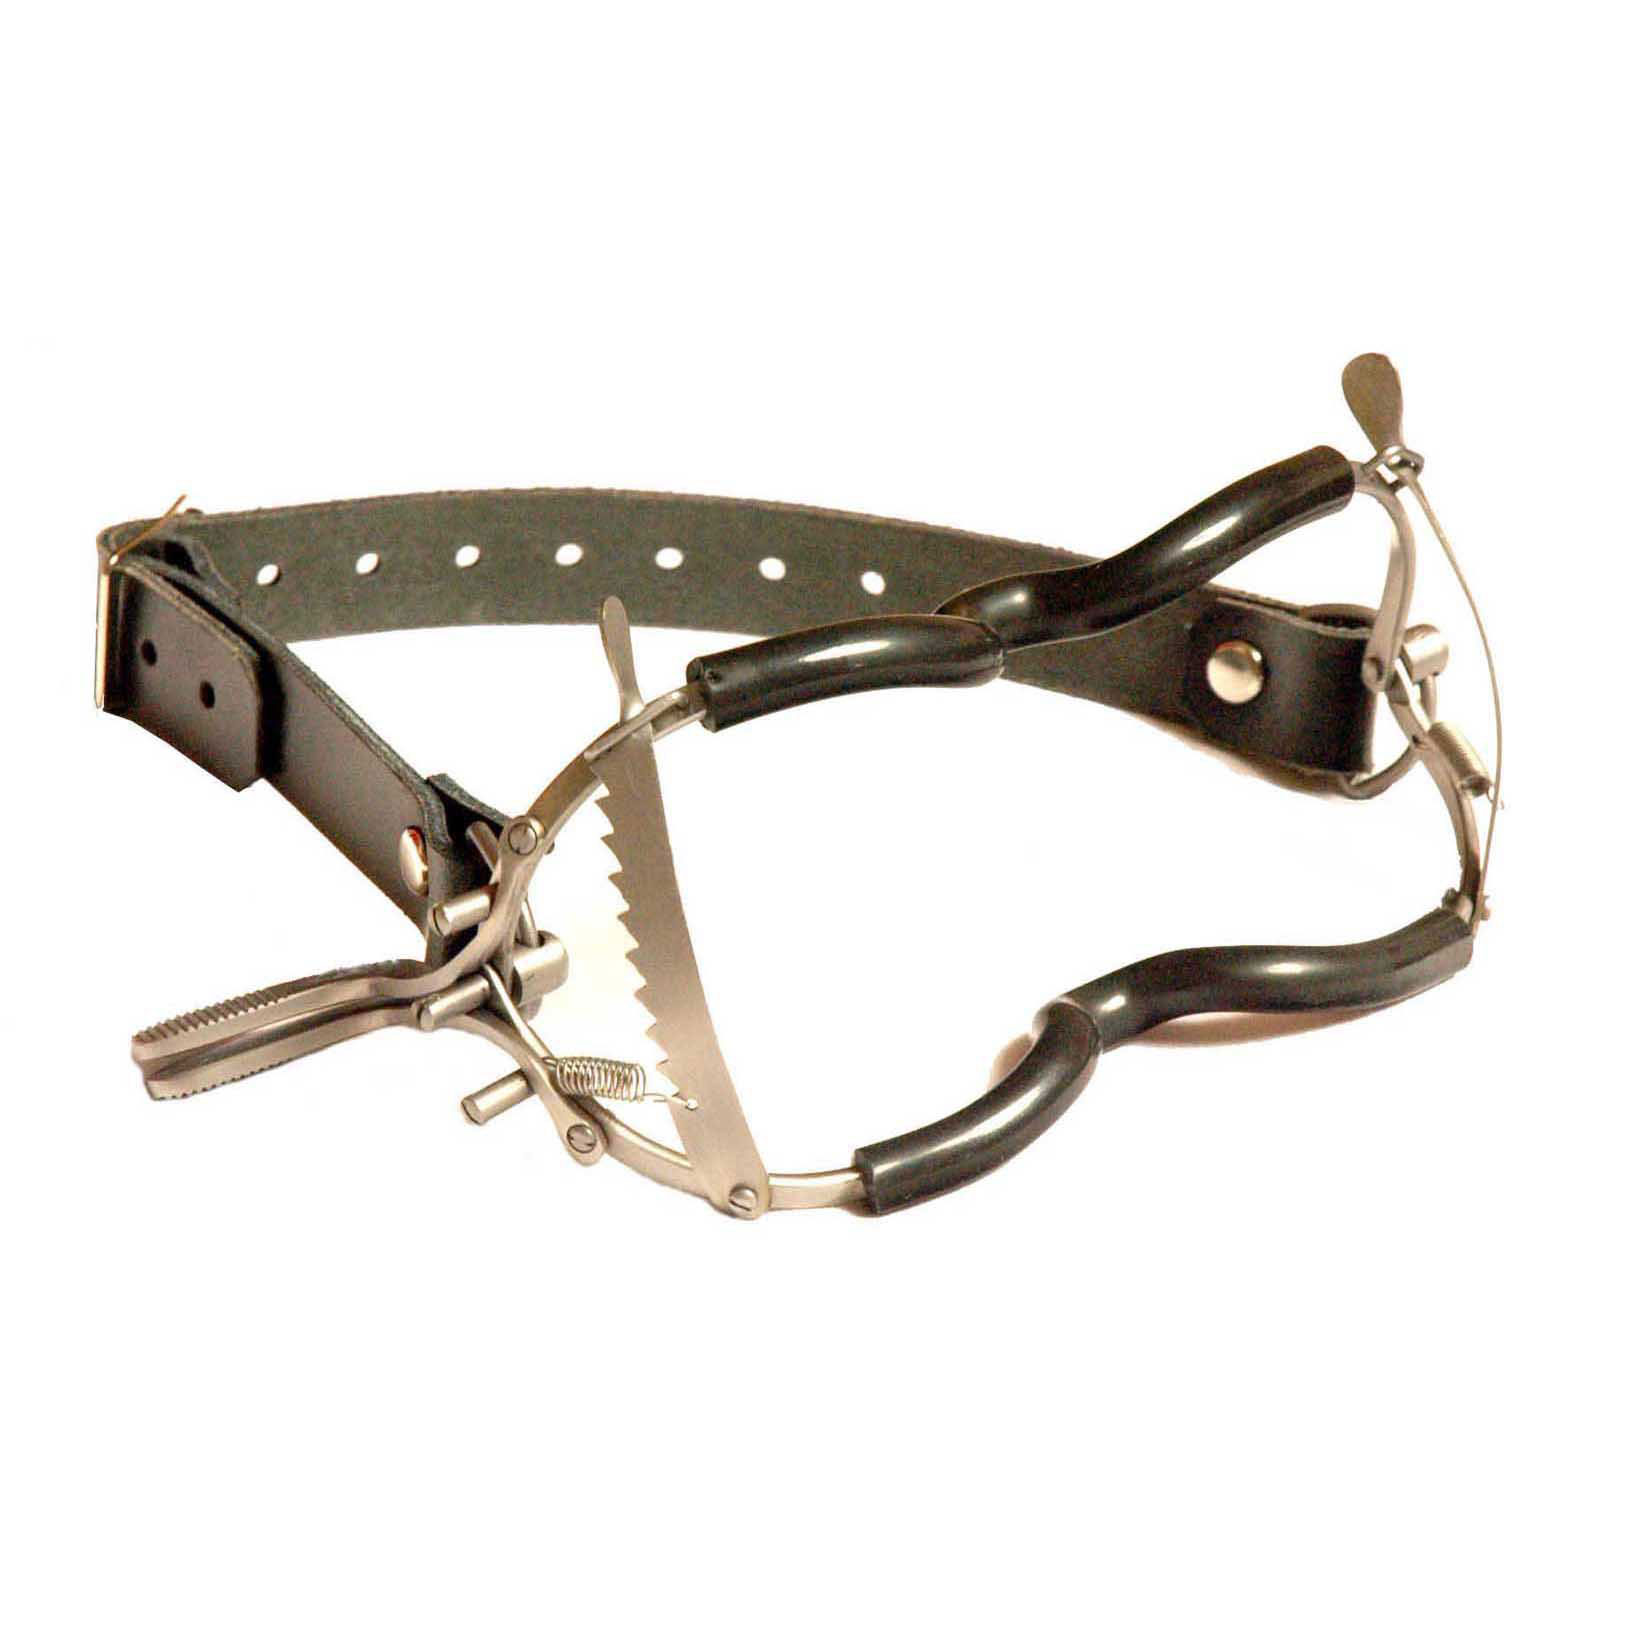 Whitehead PVC Coated Dental Gag with Leather Buckle Strap